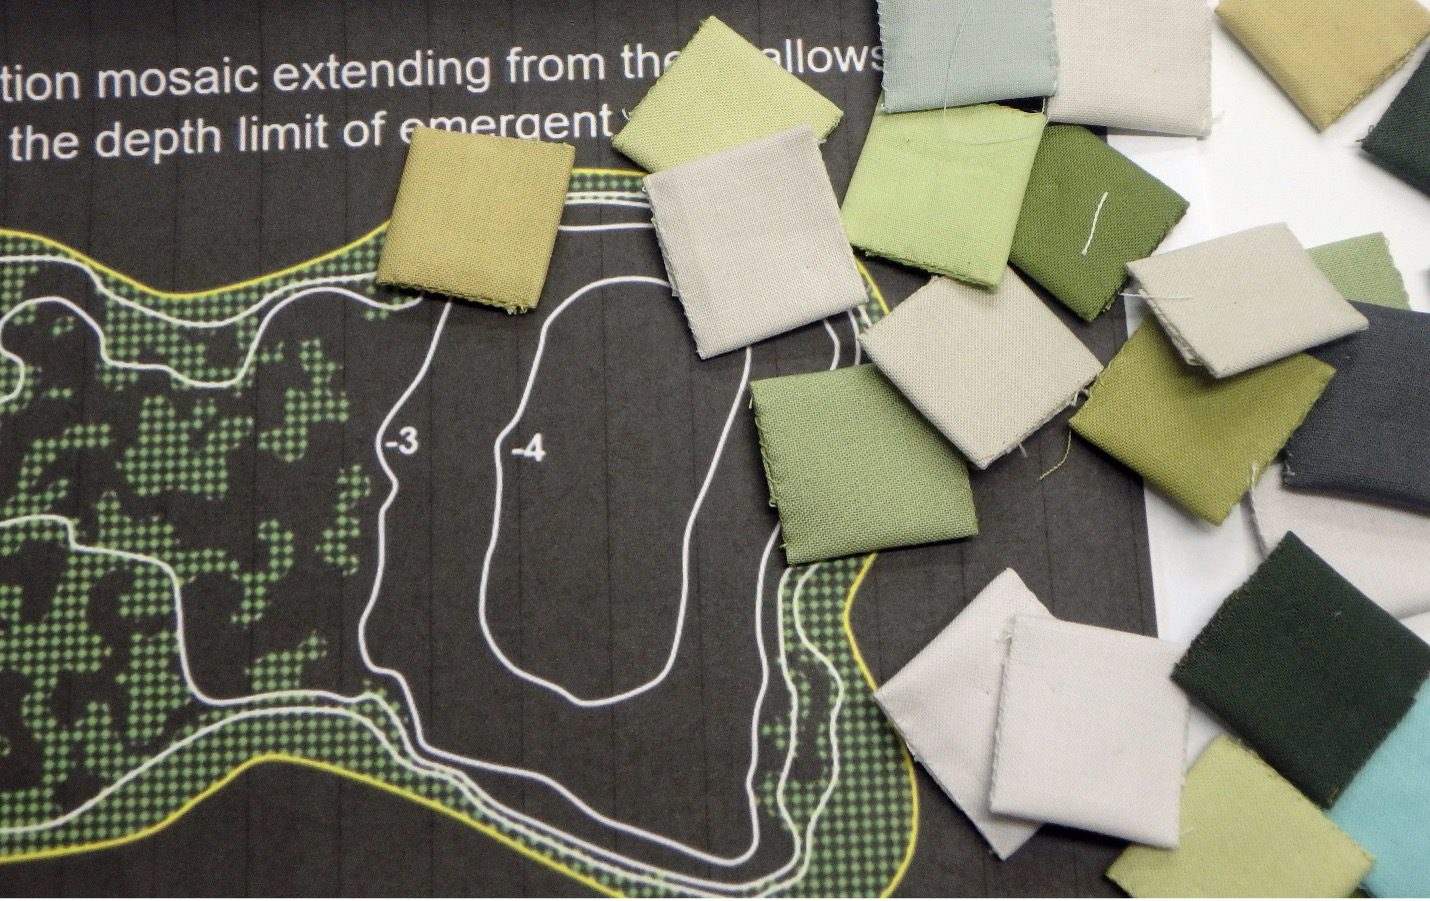 Image of researcher Gary Sullivan’s Hemi-Marsh map with multiple squares of different-colored green squares of fabric.